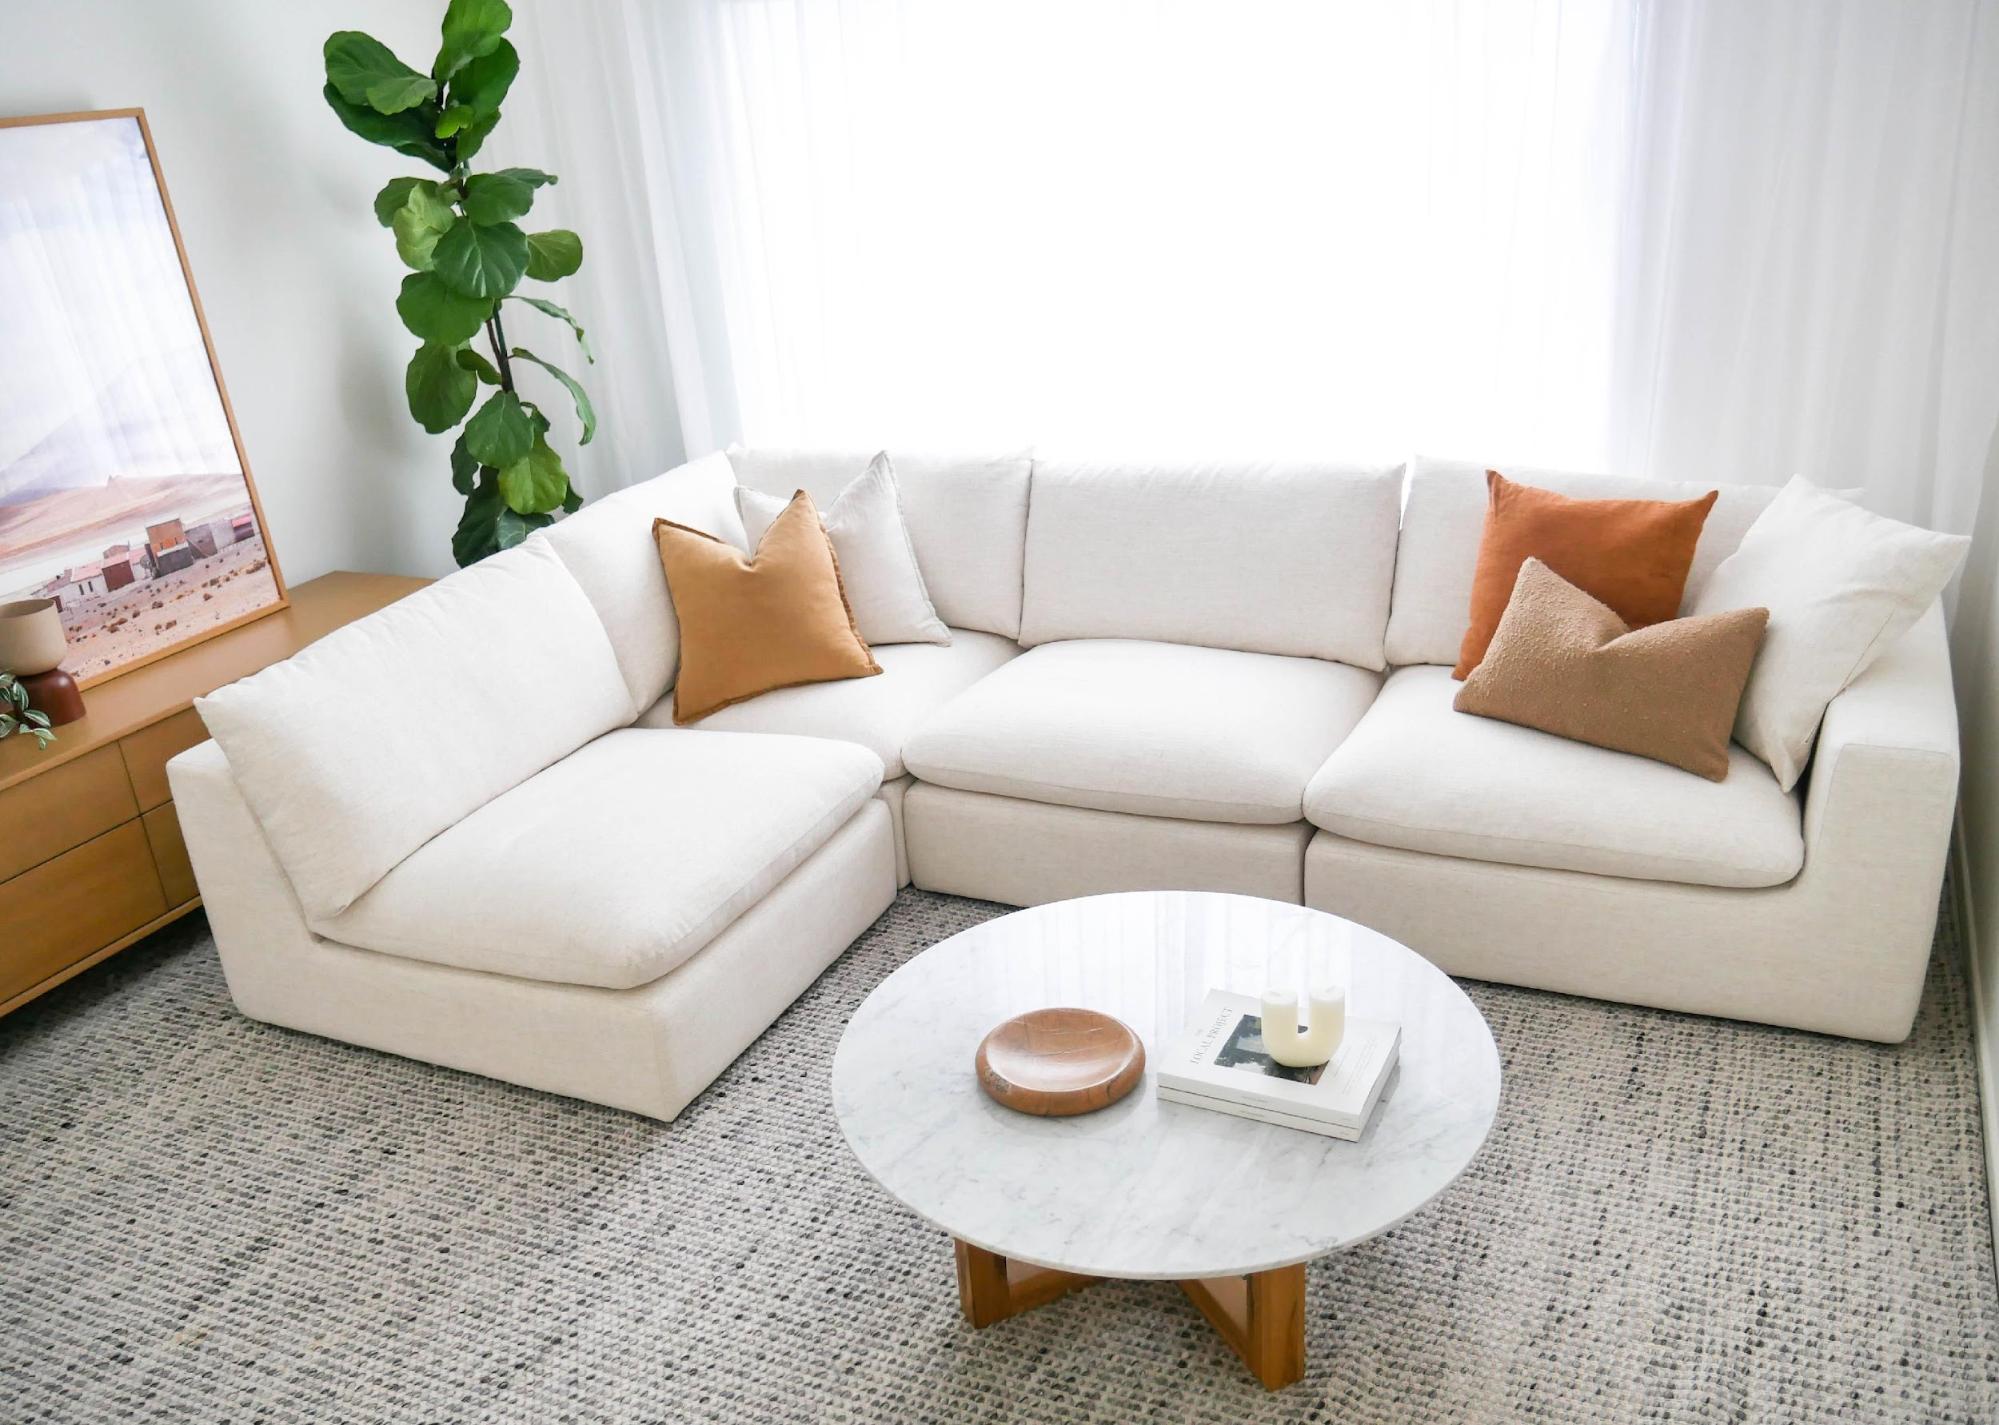 How To Clean A White Fabric Sofa